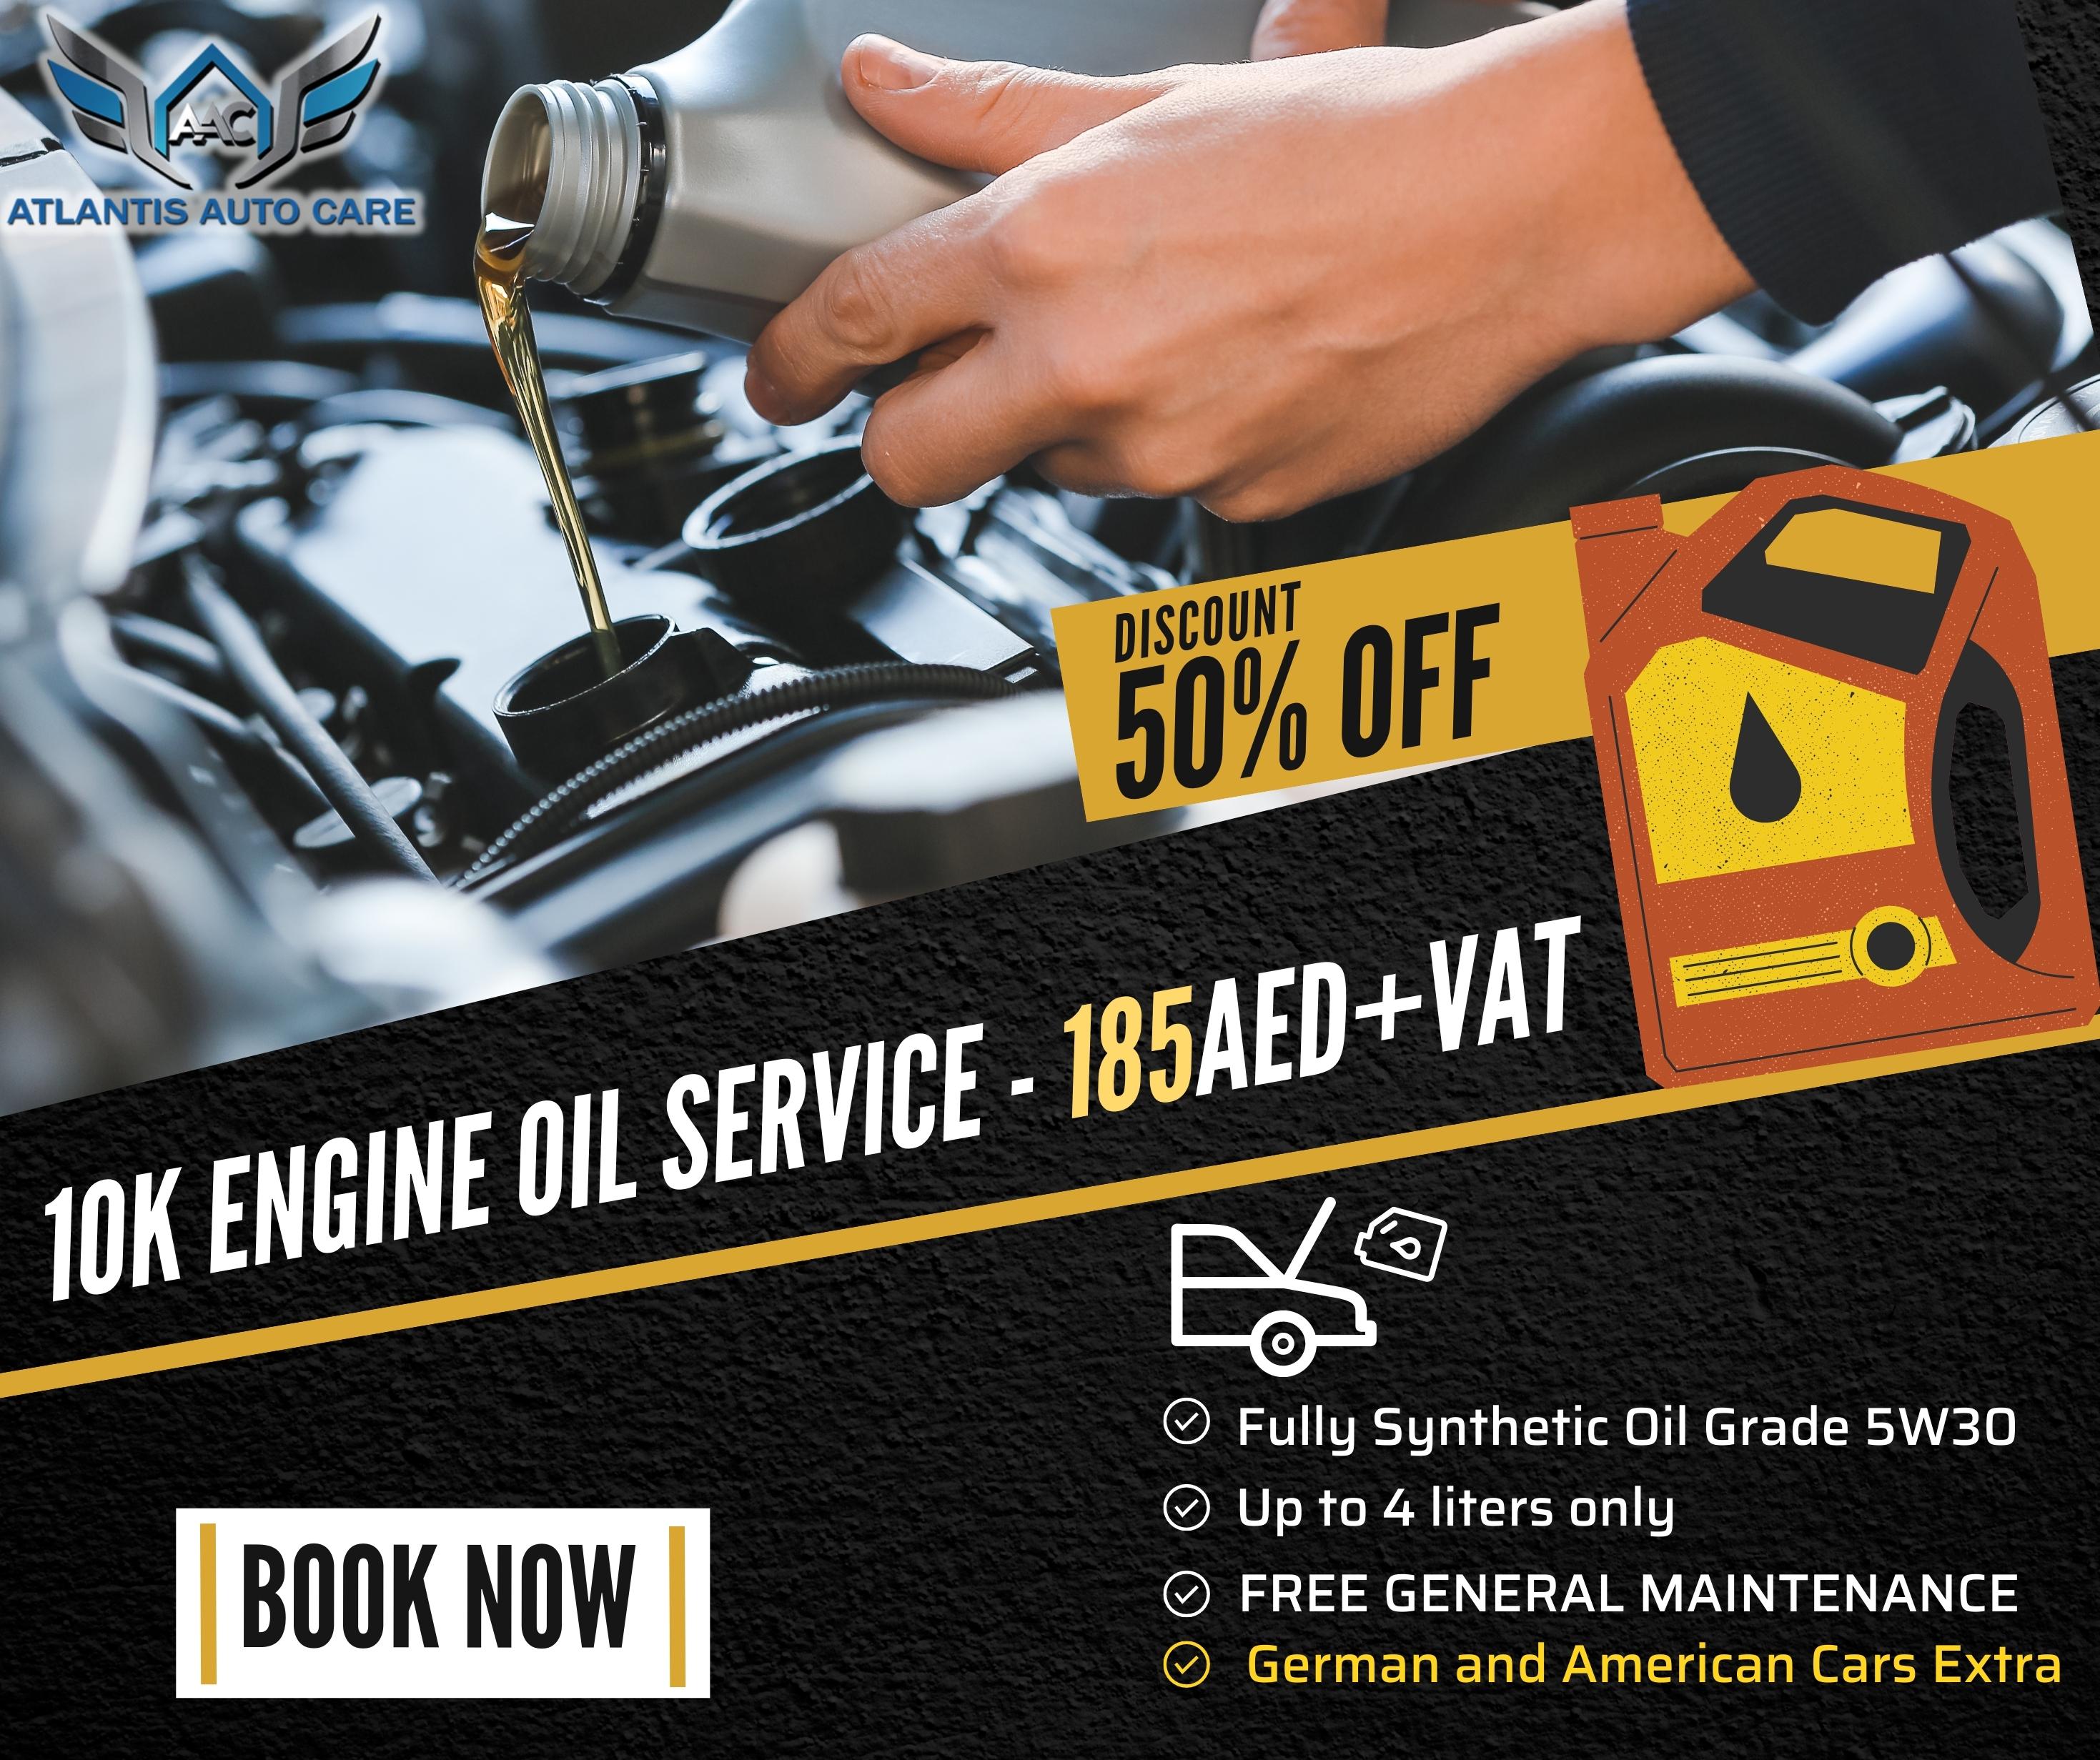 50% Discount on 10K Engine Oil Service @ 185 AED With Free General Maintenance.